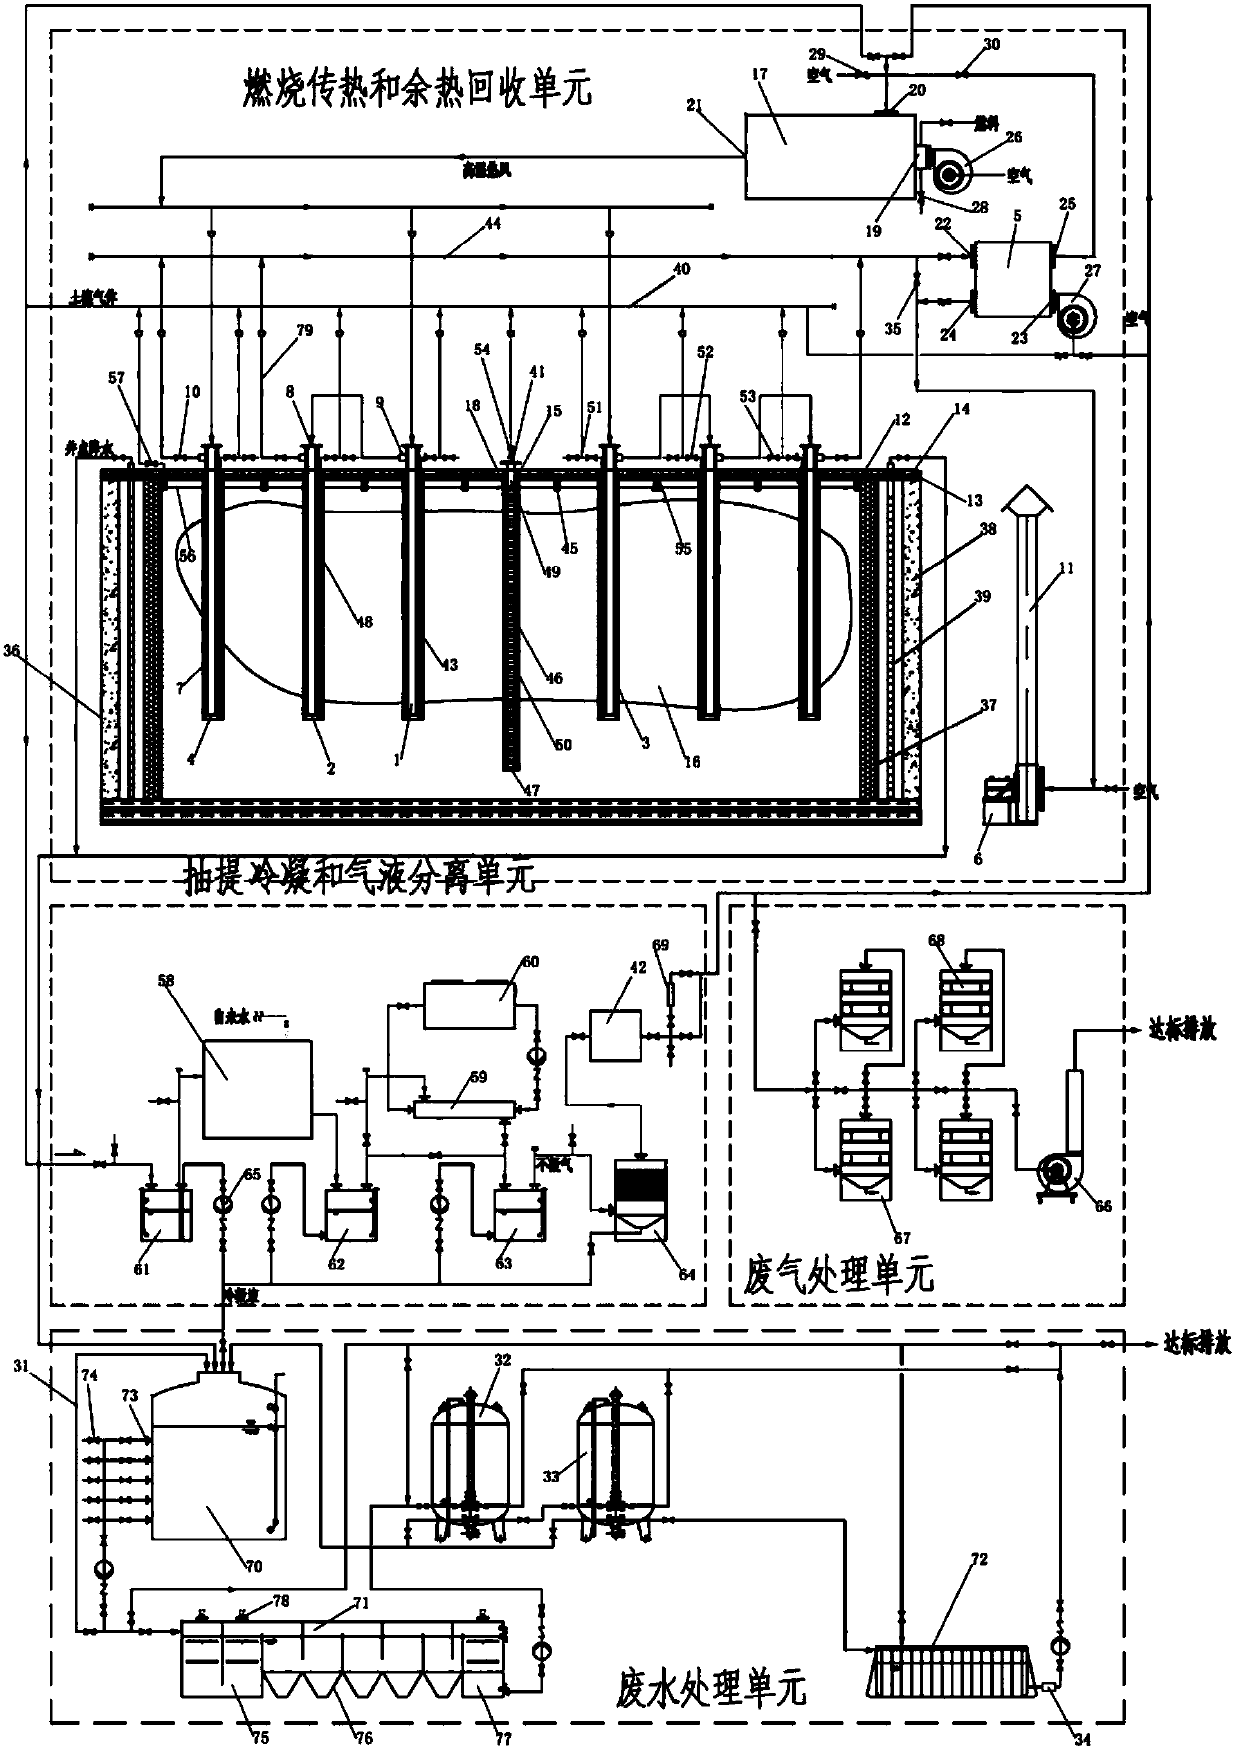 Concentrated combustion type in-situ thermal desorption repairing method for contaminated site